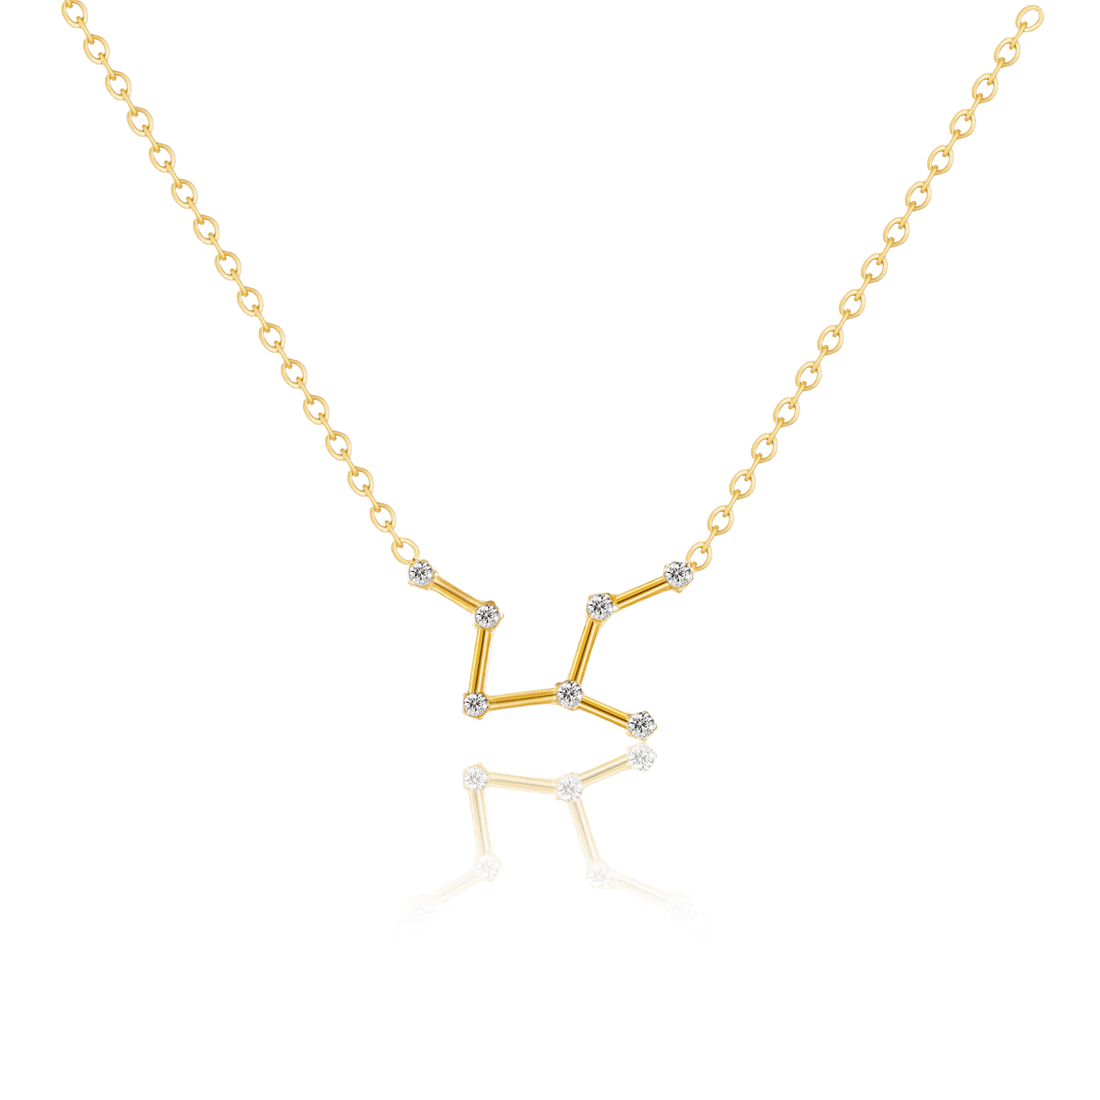 bianco rosso Necklaces Virgo Zircon Gold Necklace cyprus greece jewelry gift free shipping europe worldwide